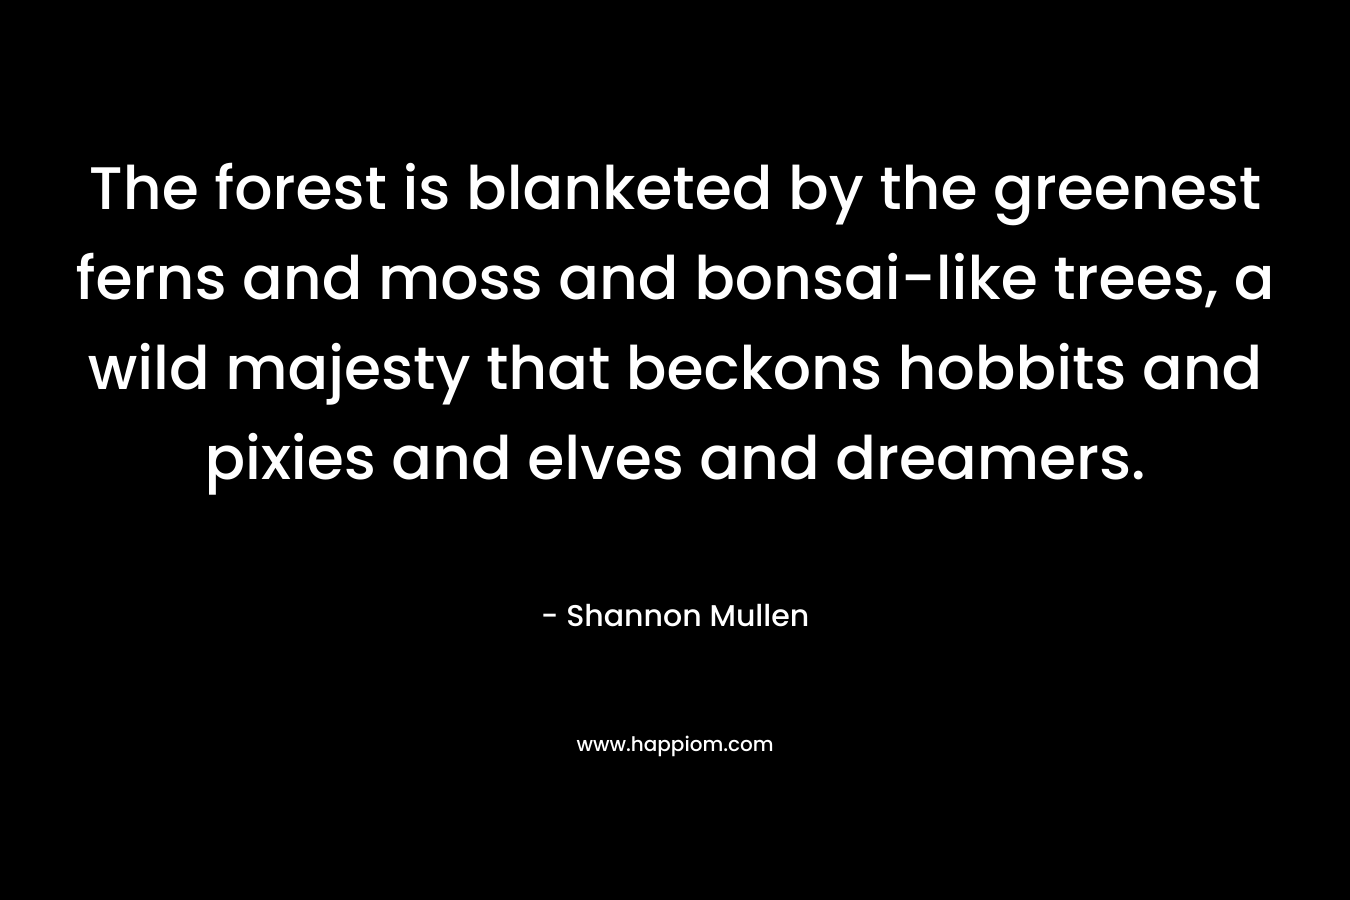 The forest is blanketed by the greenest ferns and moss and bonsai-like trees, a wild majesty that beckons hobbits and pixies and elves and dreamers. – Shannon  Mullen